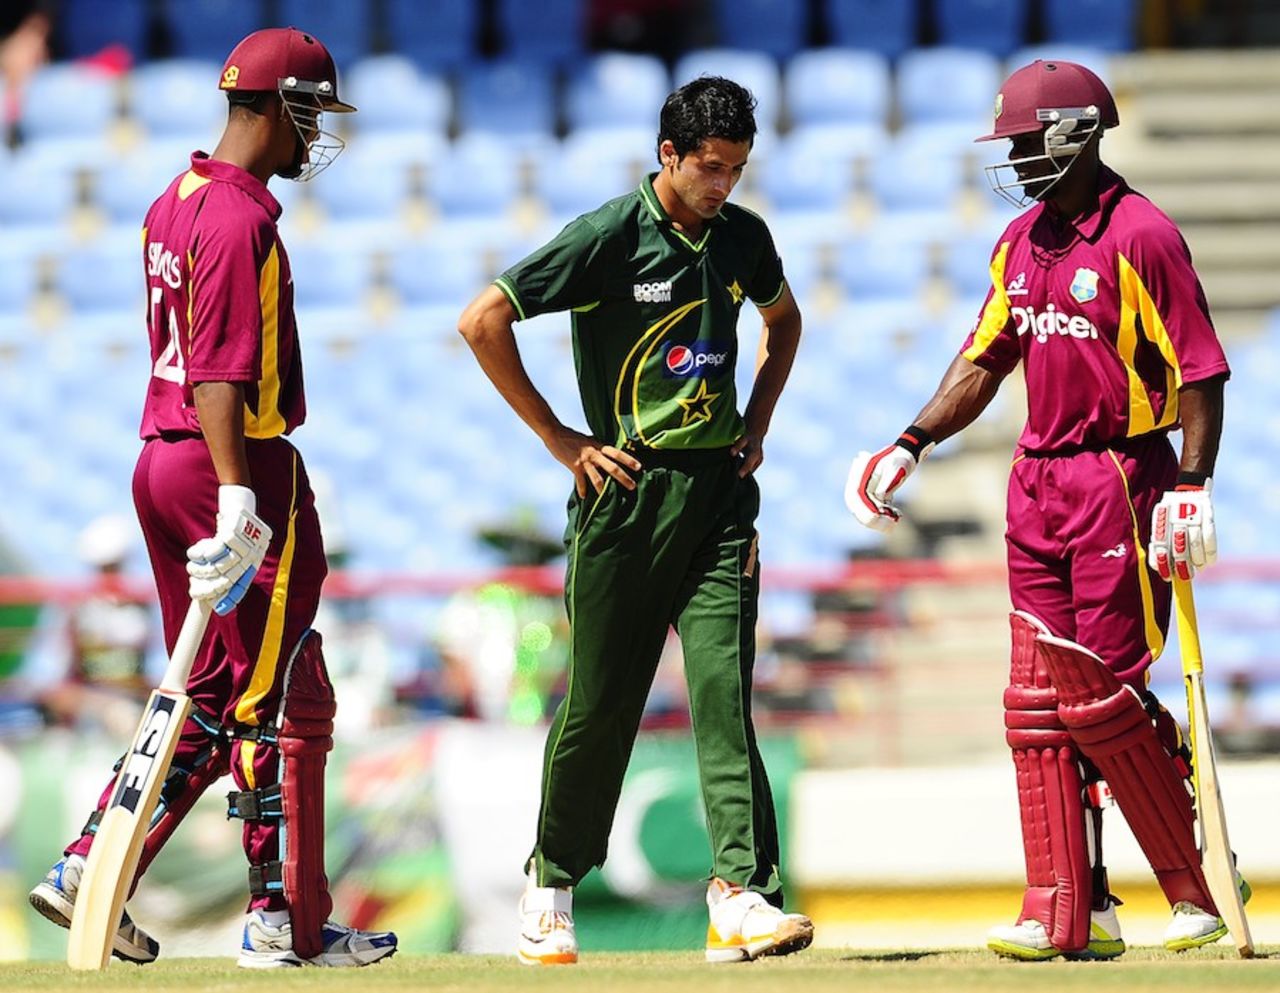 Junaid Khan walks past the West Indian openers Devon Smith and Lendl Simmons, West Indies v Pakistan, 2nd ODI, Gros Islet, April 25, 2011